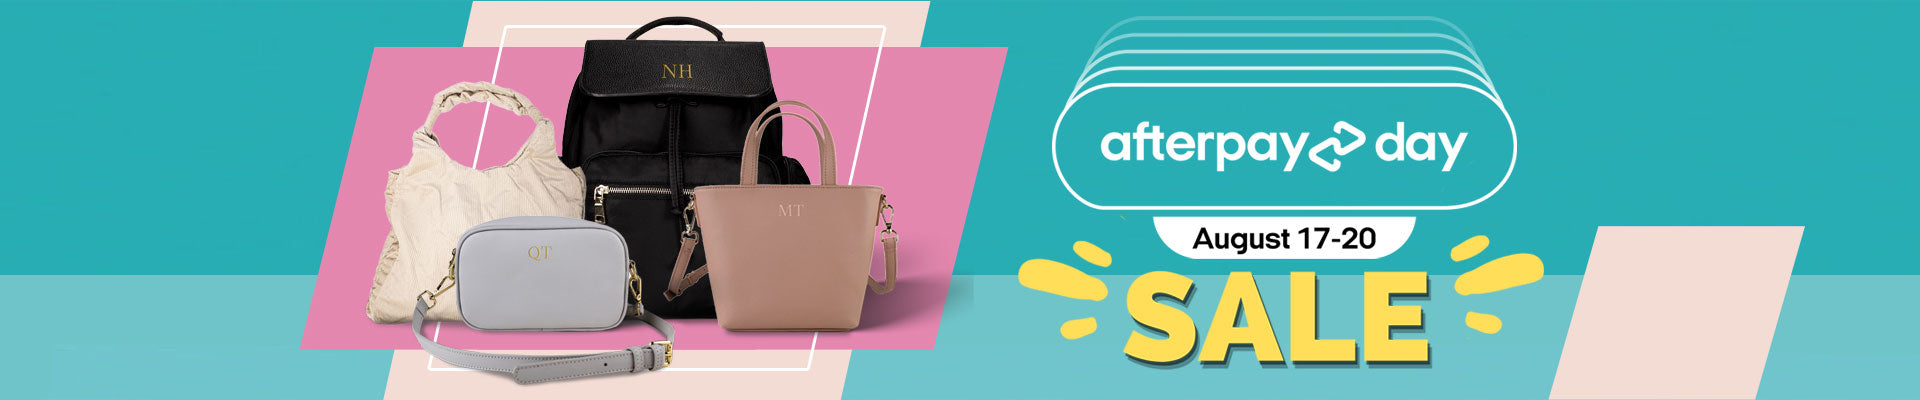 Afterpay-Day-Sale-Banner